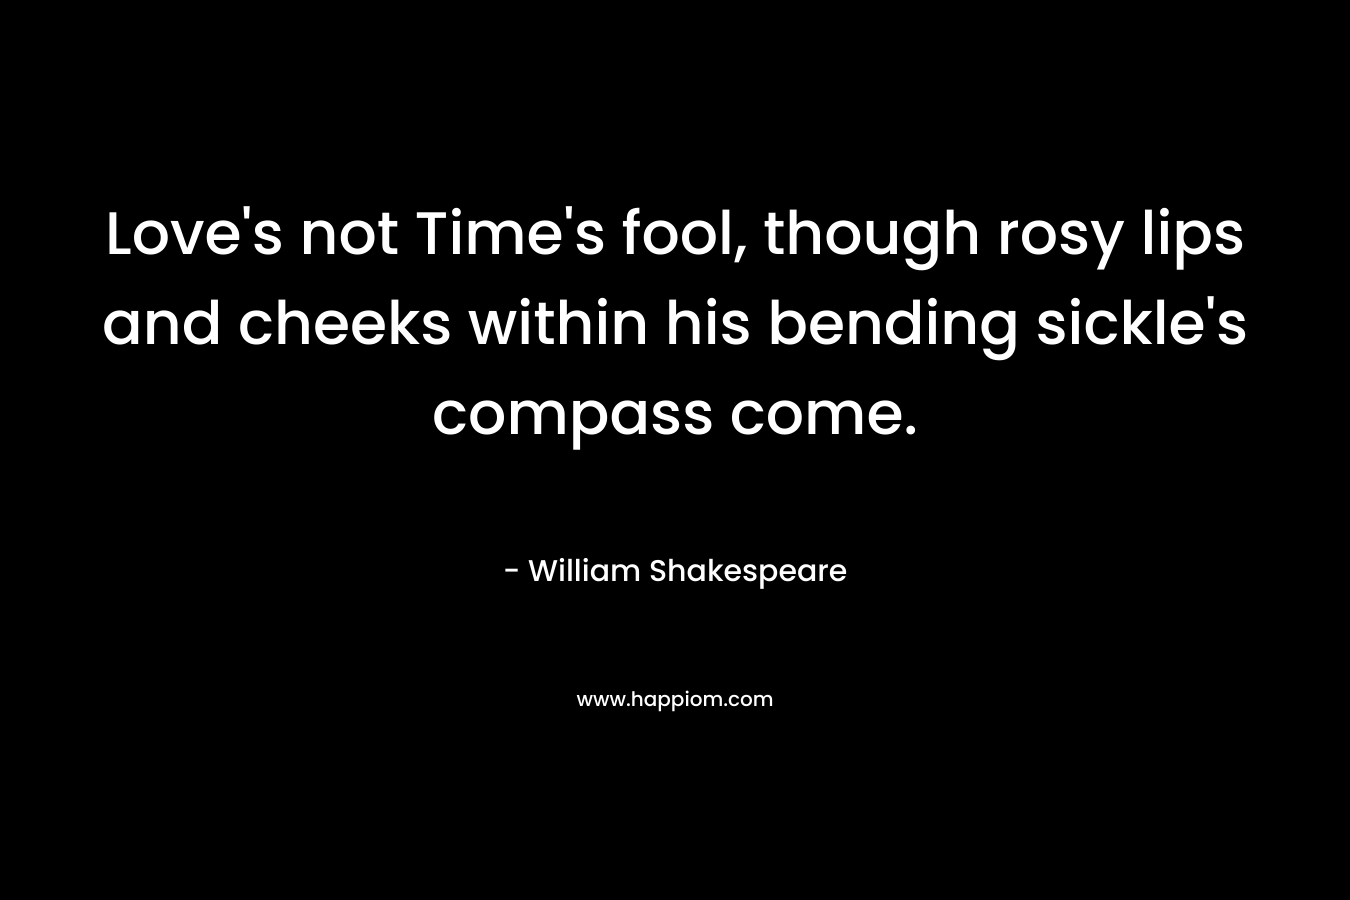 Love’s not Time’s fool, though rosy lips and cheeks within his bending sickle’s compass come. – William Shakespeare